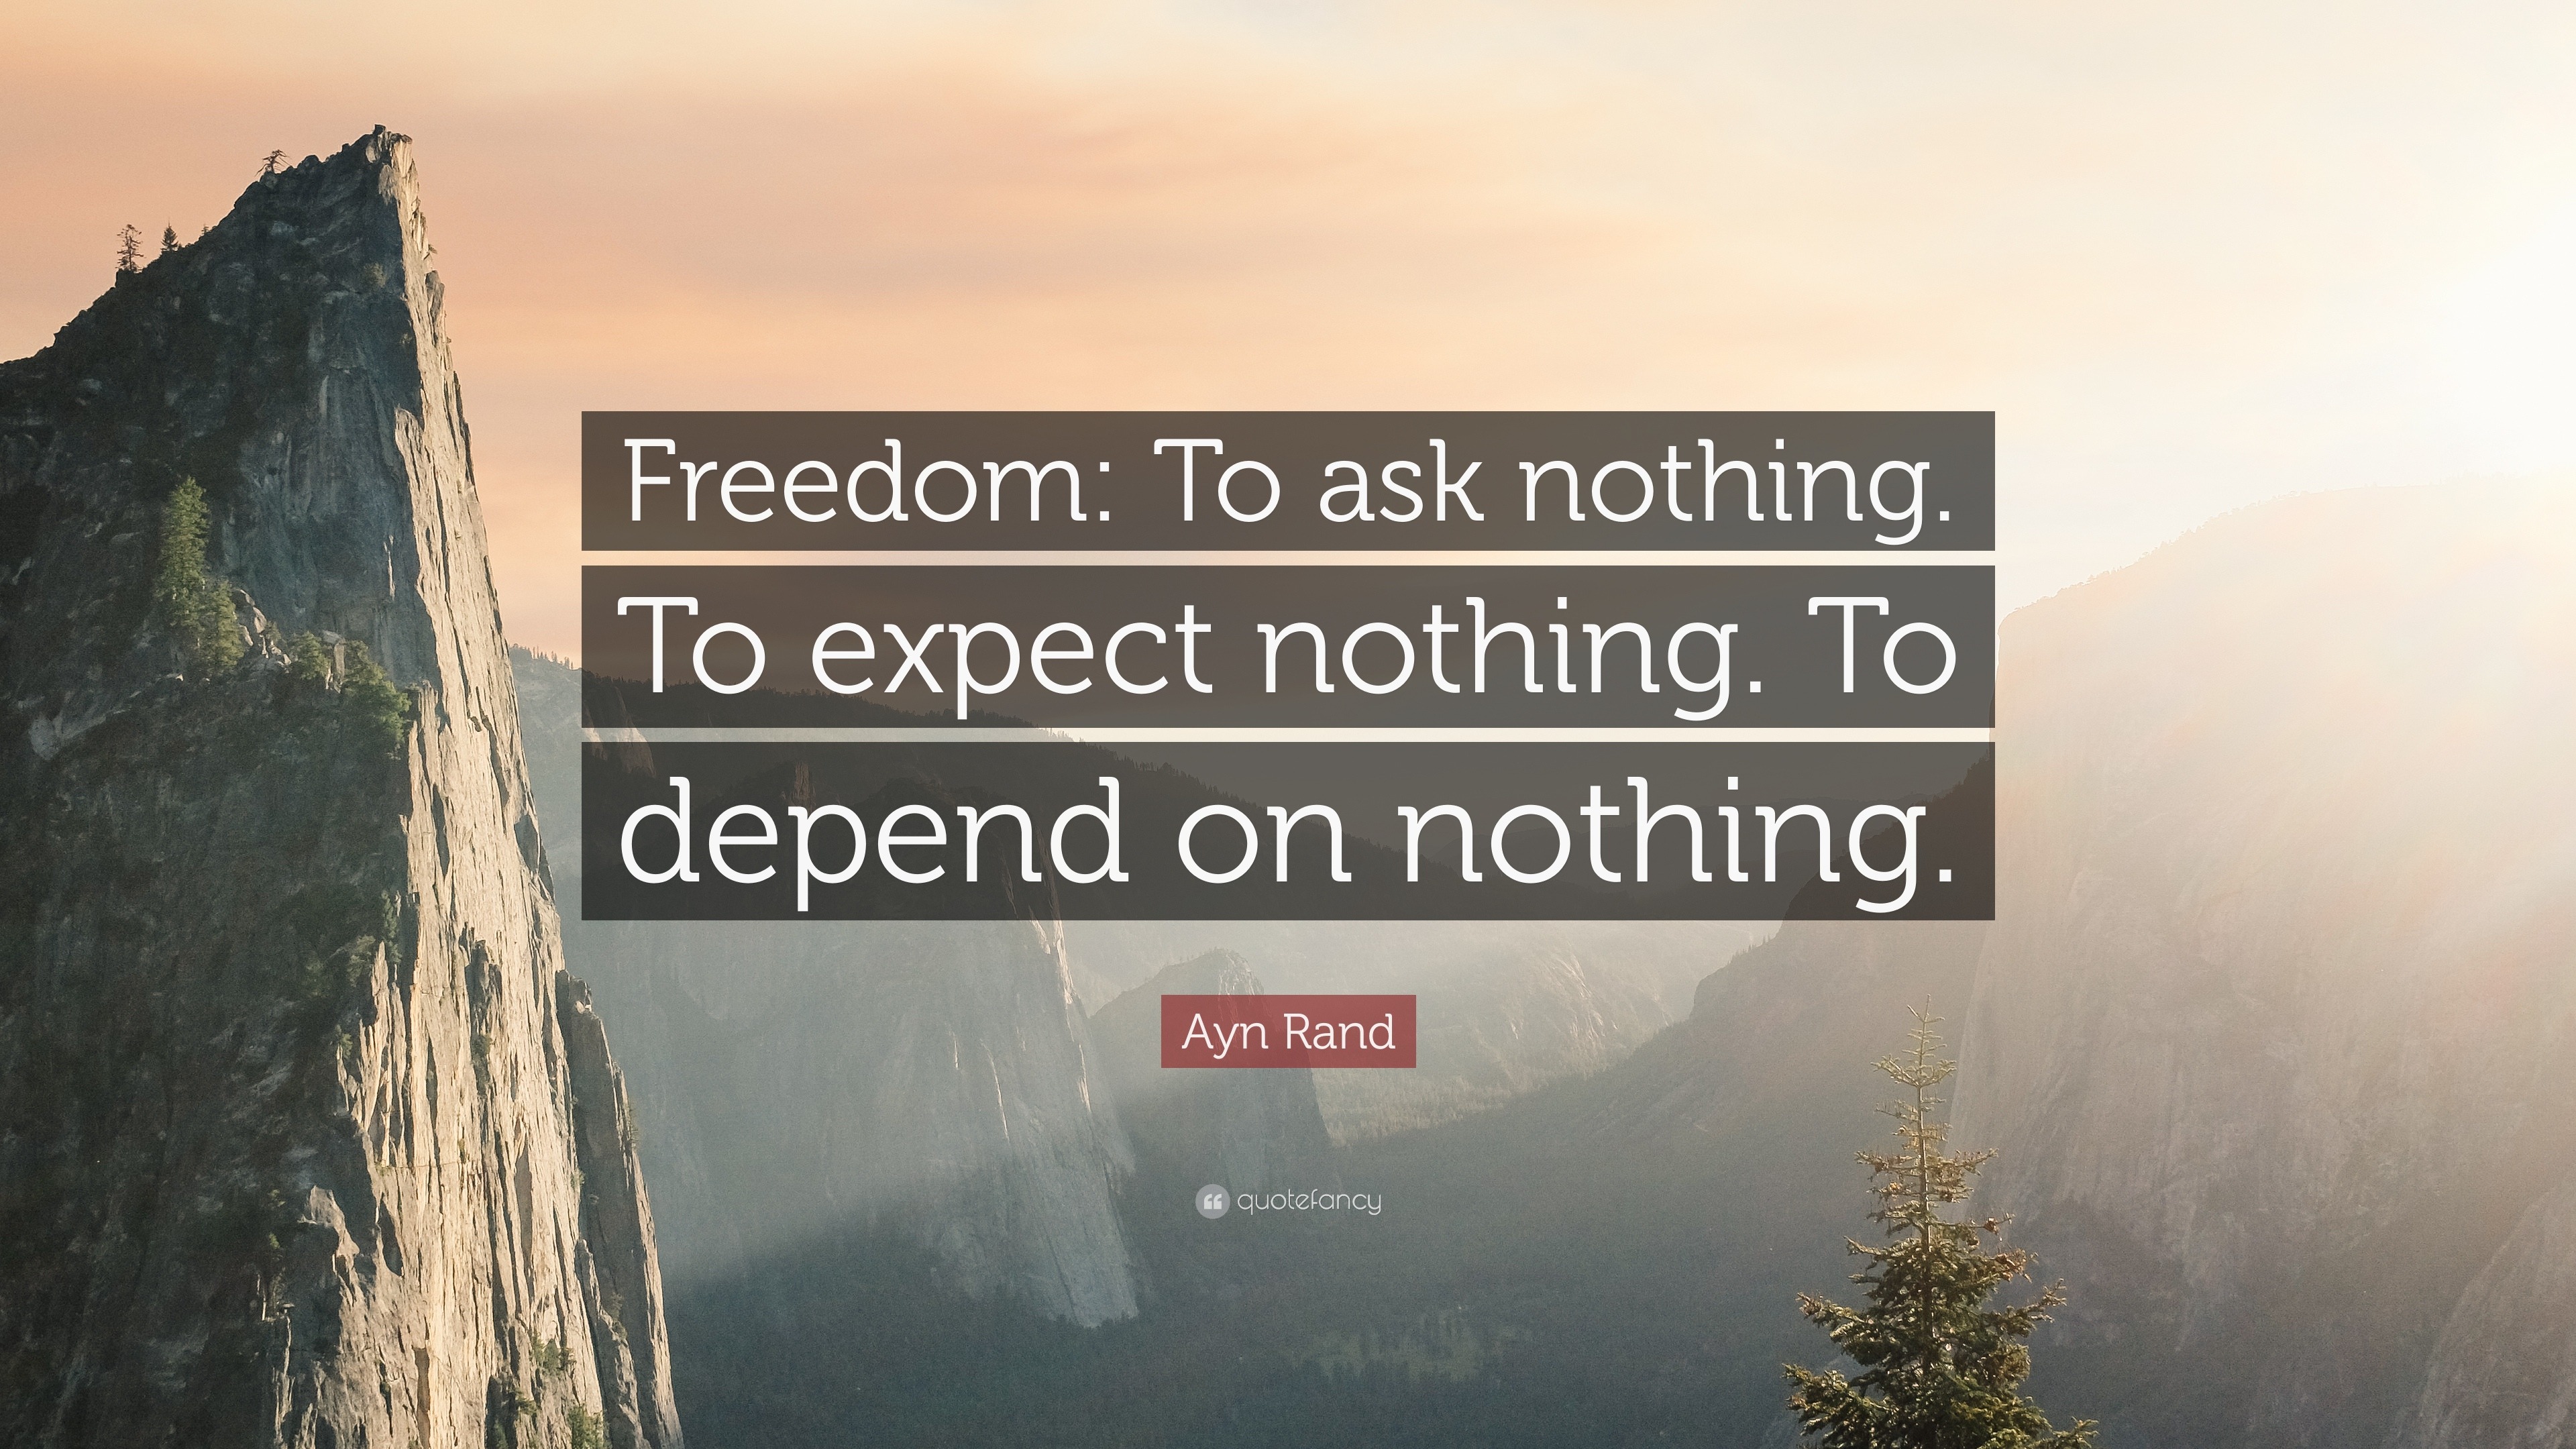 Ayn Rand Quote: “Freedom: To ask nothing. To expect nothing. To depend